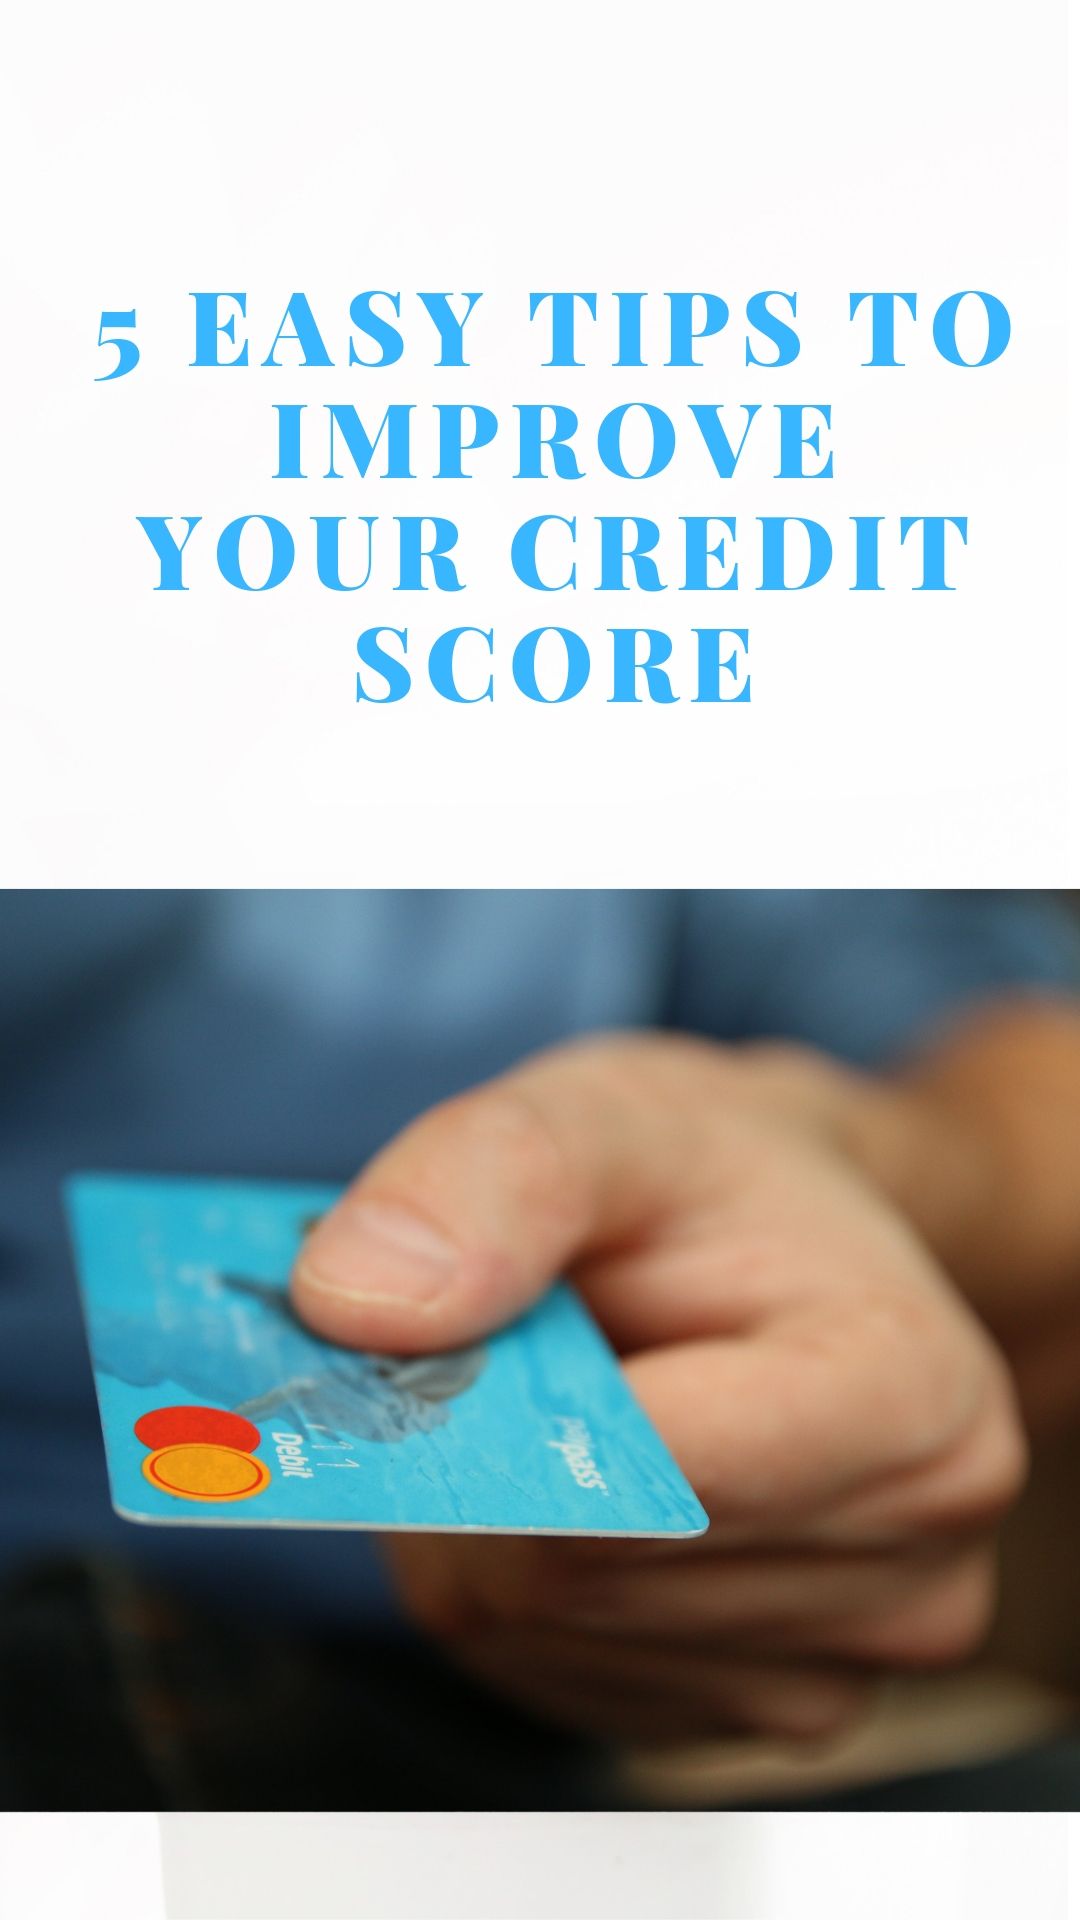 5 Easy Tips To Improve Your Credit Score